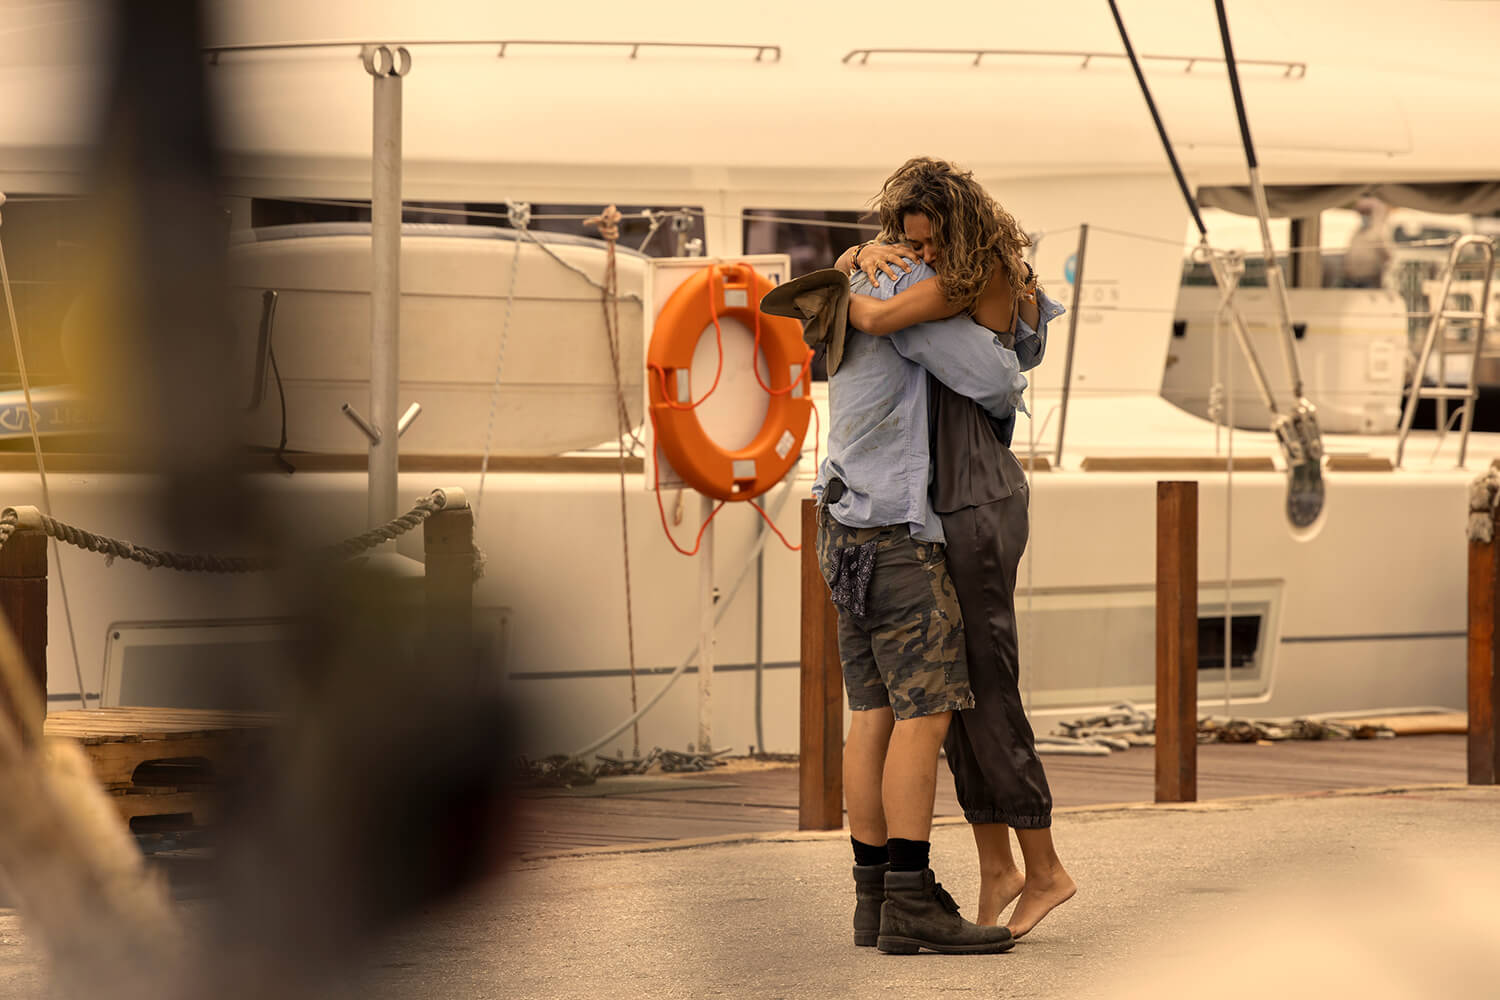 Outer Banks Season 3: Rudy Pankow as JJ and Madison Bailey as Kiara embracing in a hug on a dock.